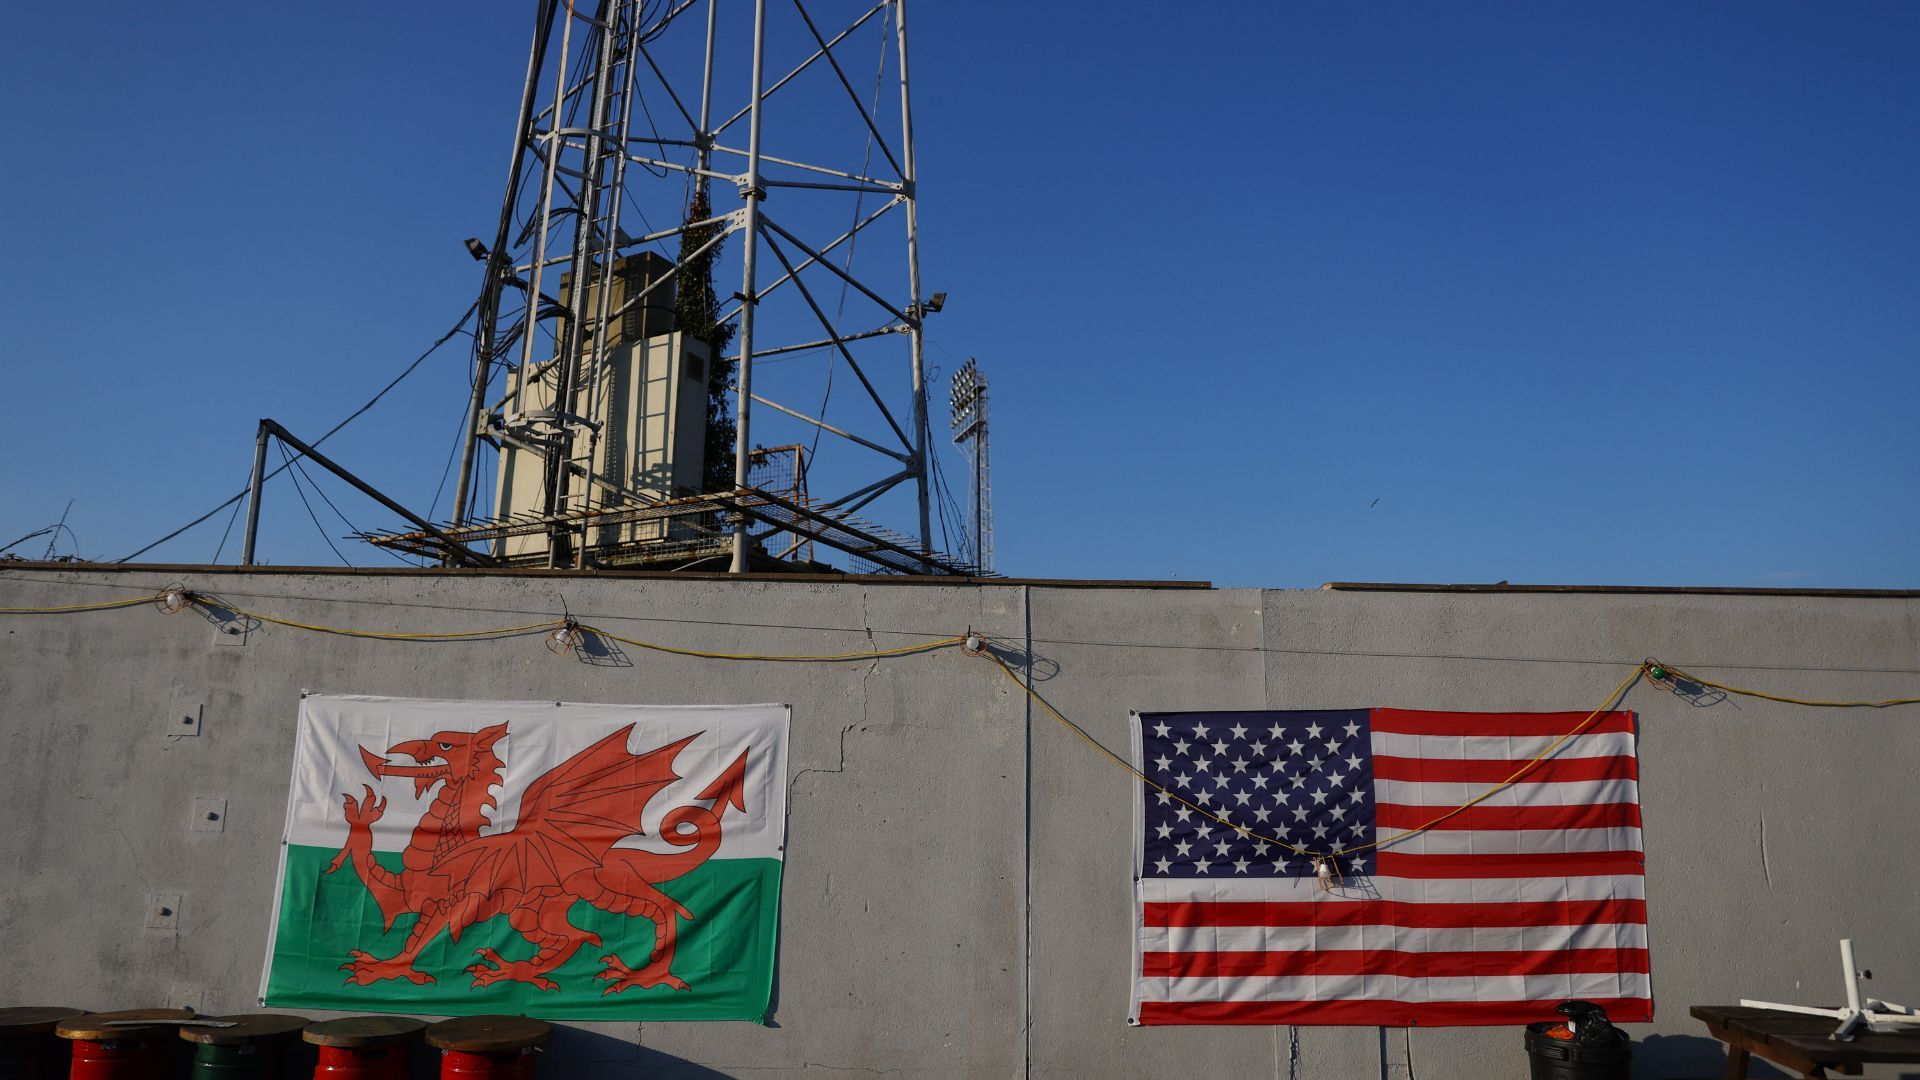 Wales and US flags on display outside Wrexham's Racecourse Ground